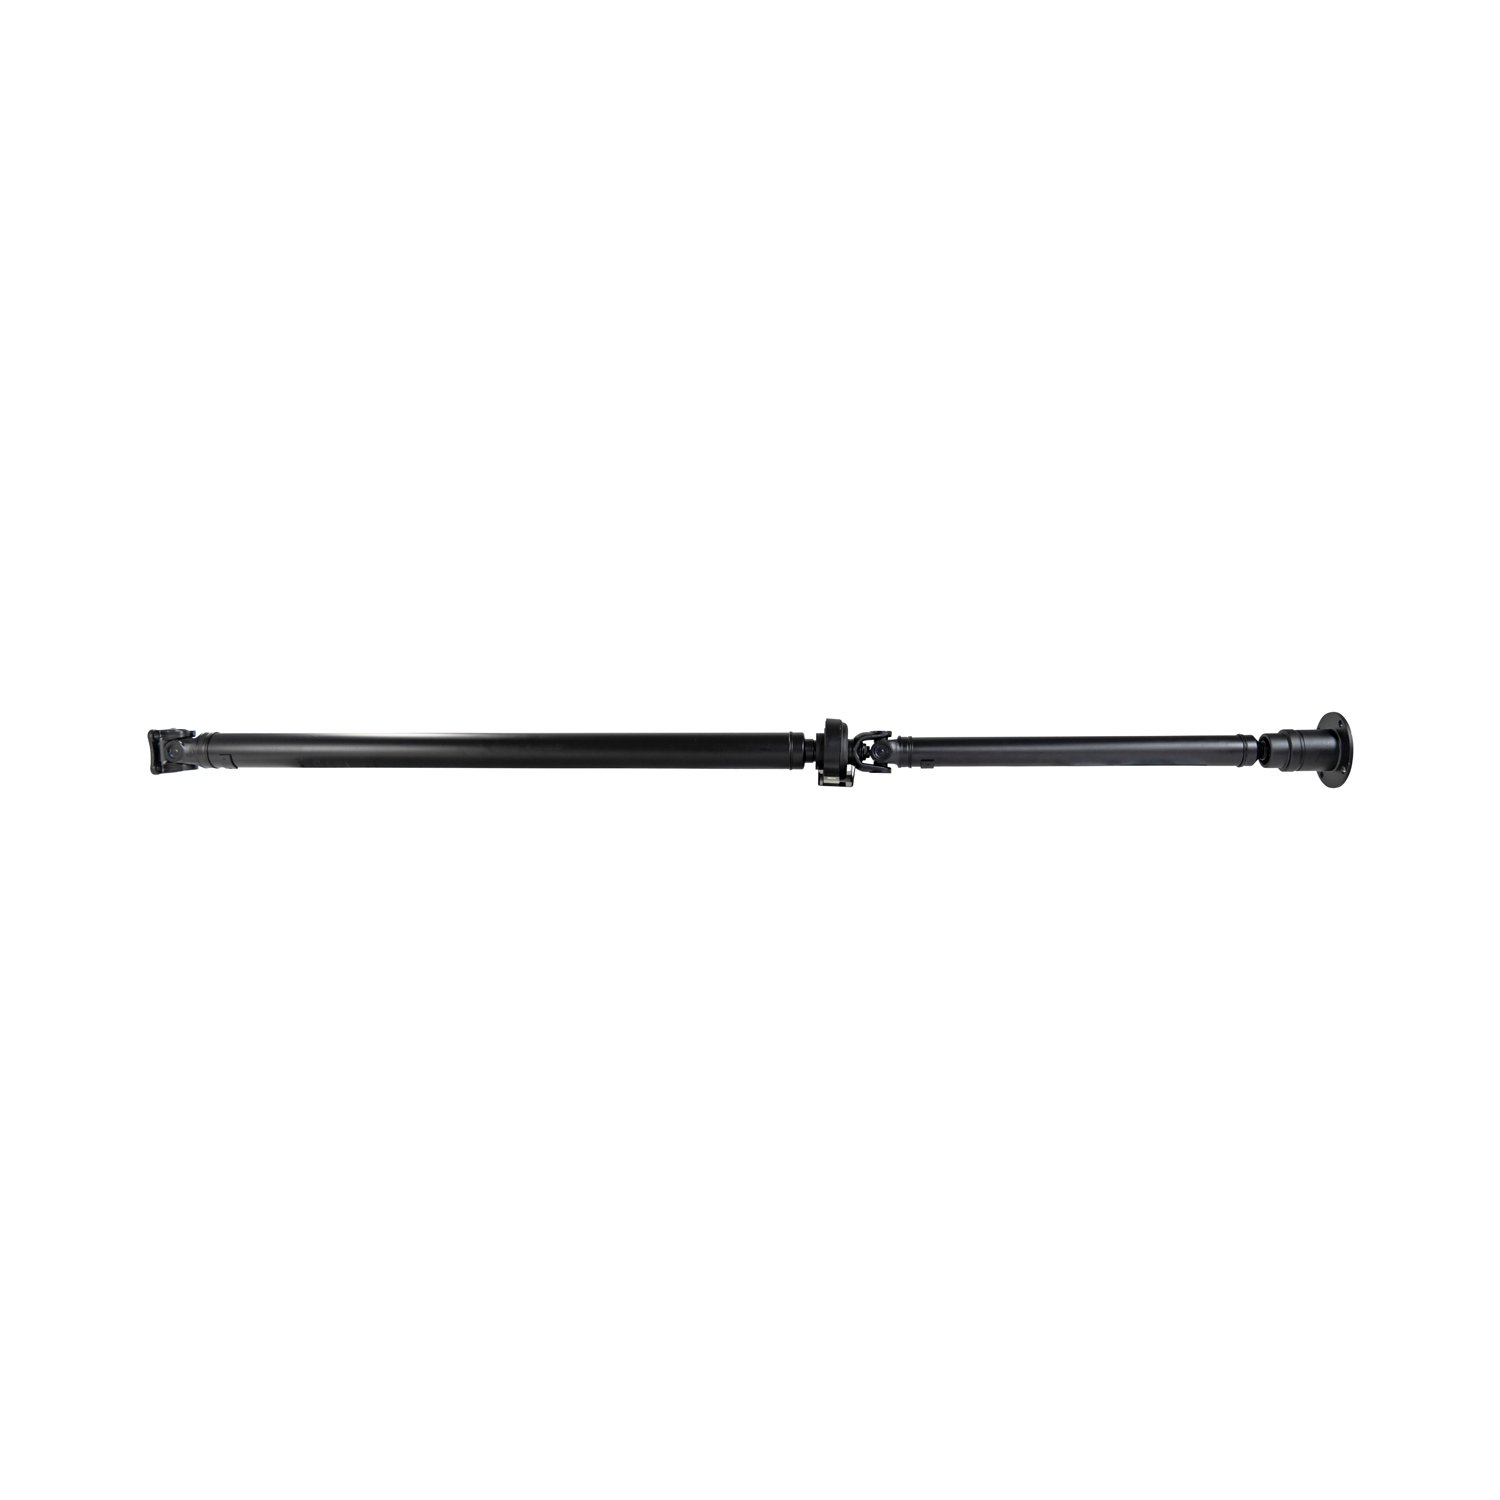 USA Standard 44647 Rear Driveshaft, For Ford Fusion, 80 in. Flange To Flange